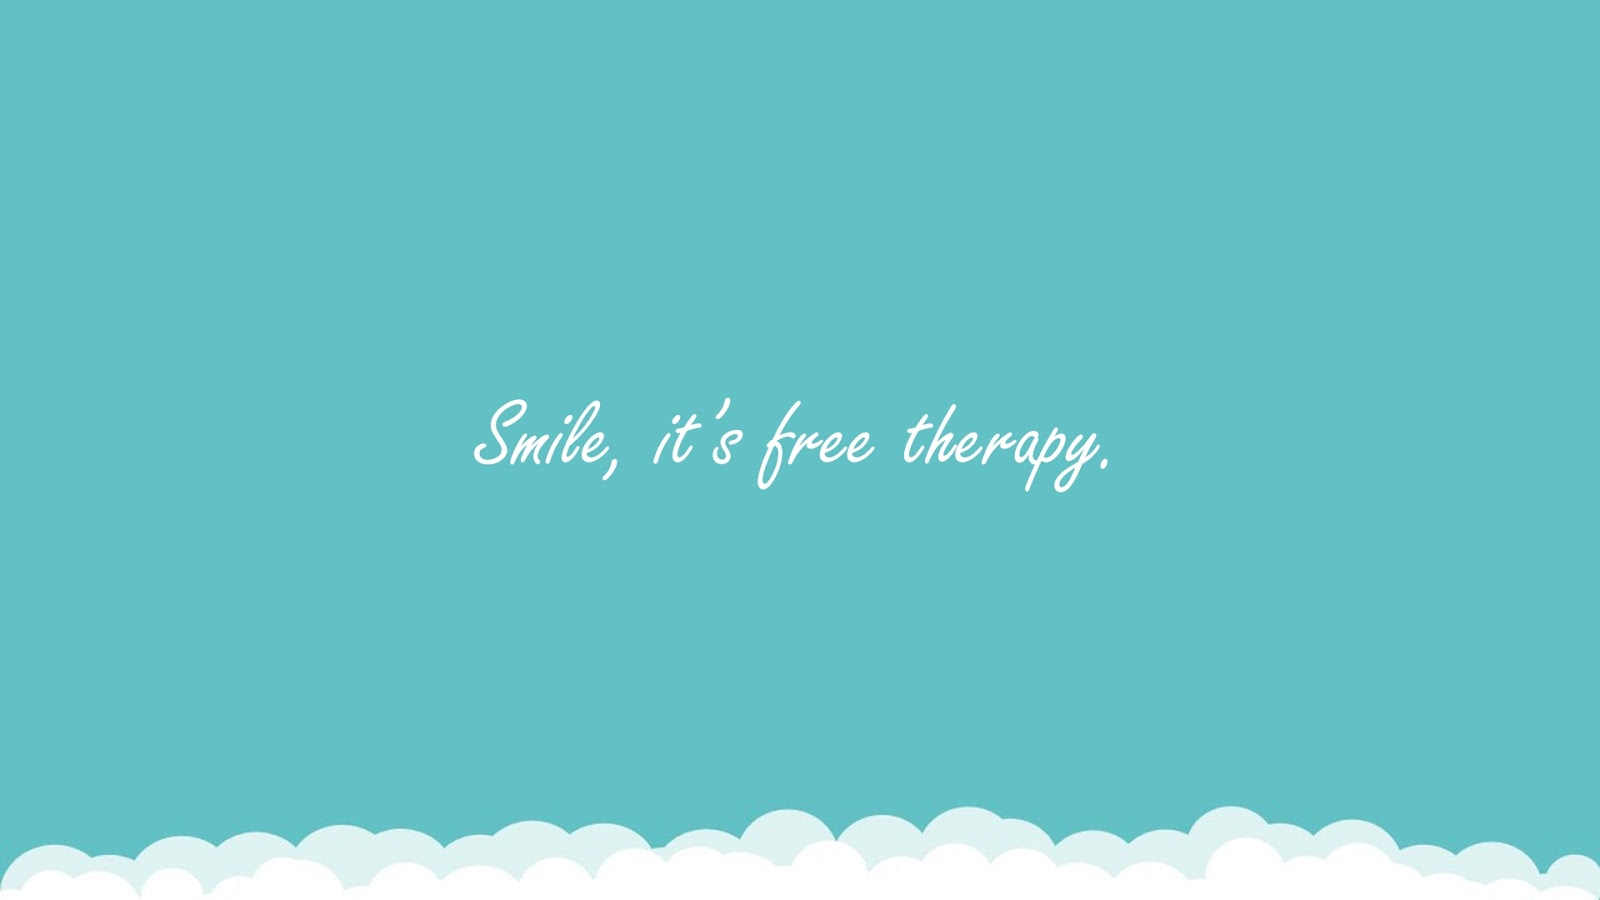 Smile, it’s free therapy.FALSE